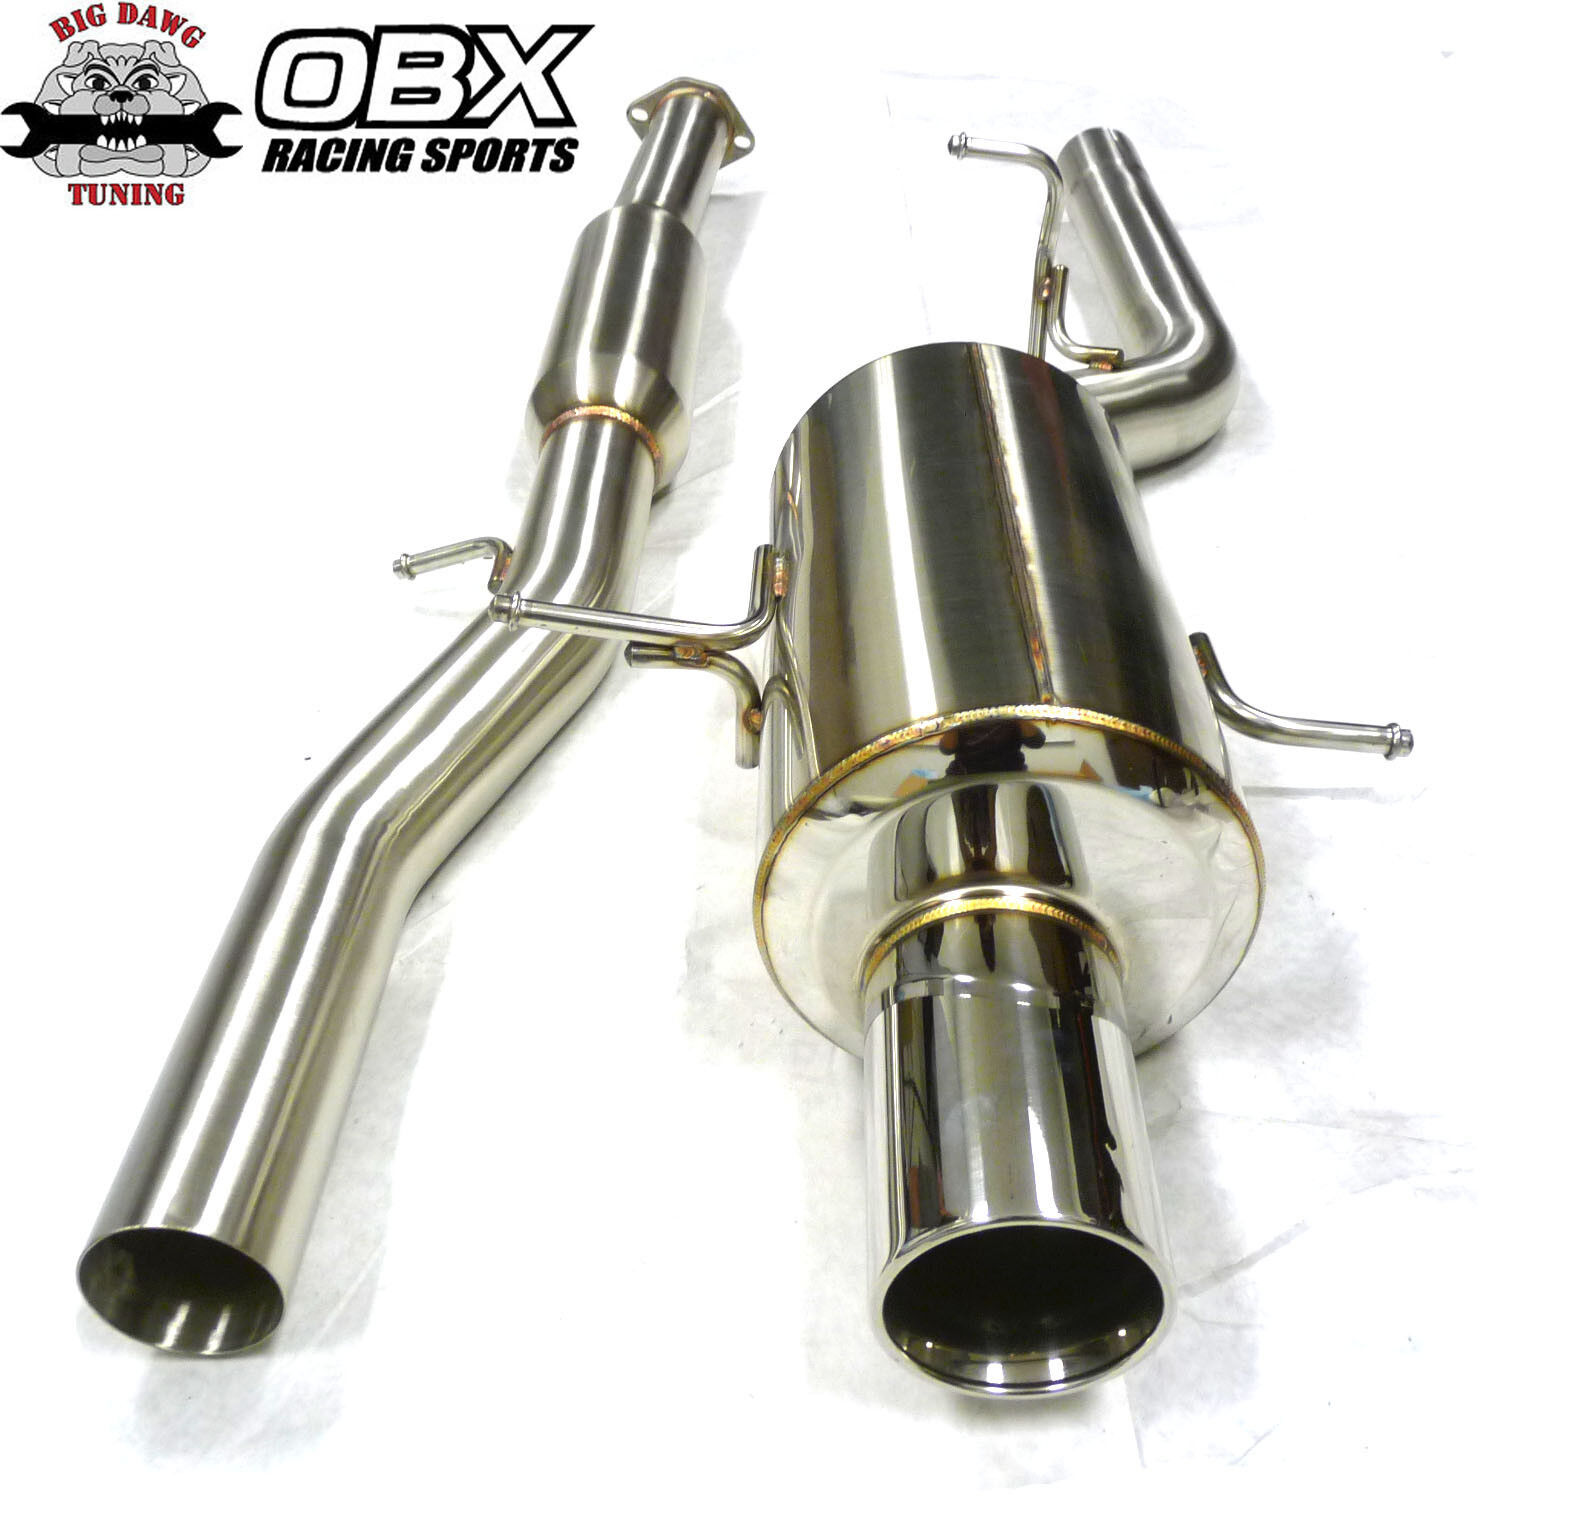 OBX Catback Exhaust System Fits 2004 To 2008 Subaru Forester XT Turbo 2.5L